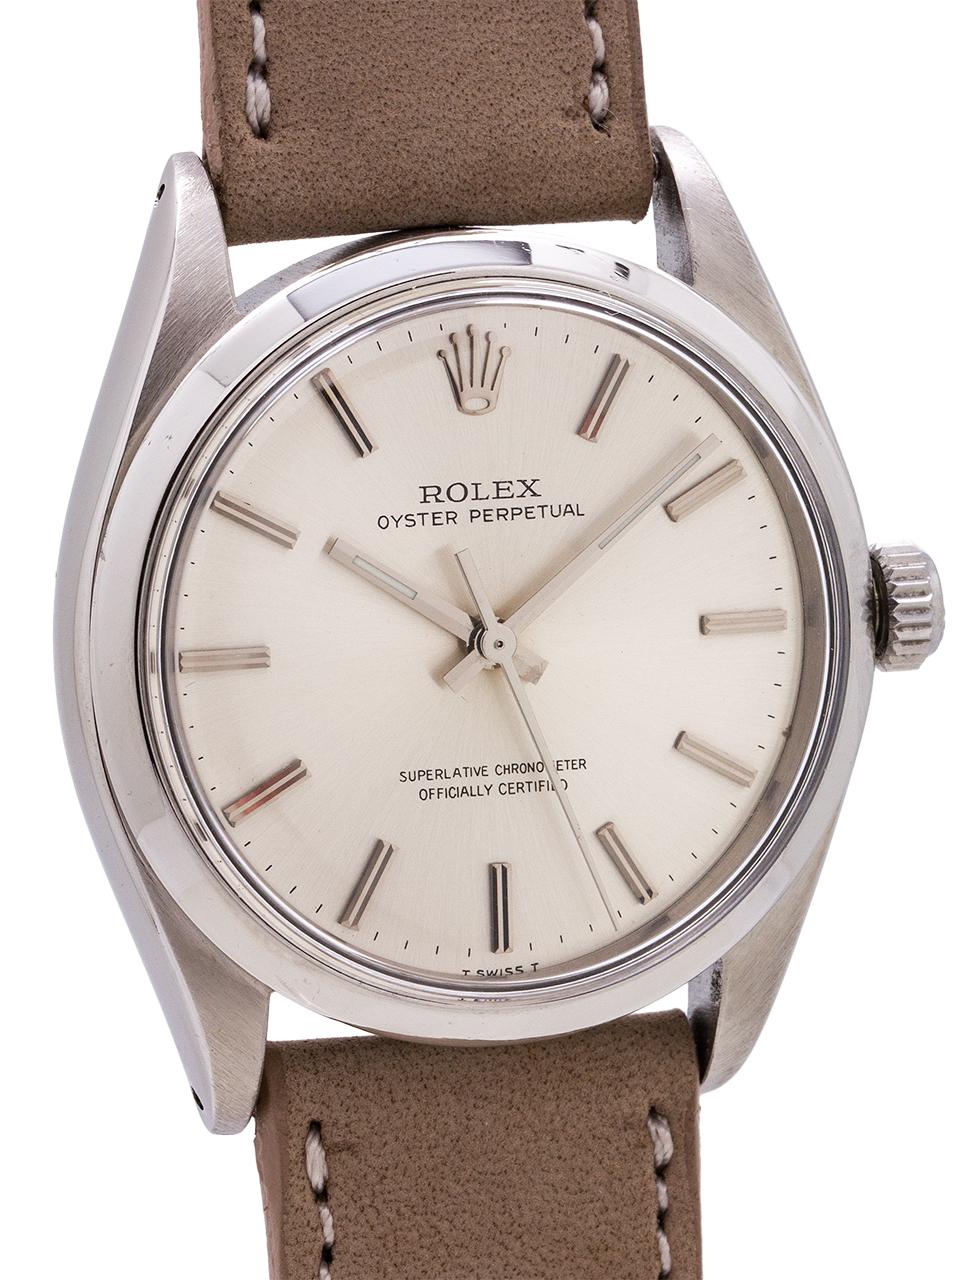 
Vintage Rolex Oyster Perpetual ref 1002 circa 1966. Featuring a 34mm diameter case with smooth bezel, acrylic crystal, and original silver satin dial with applied silver indexes and silver baton hands. Powered by caliber 1570 chronometer rated self